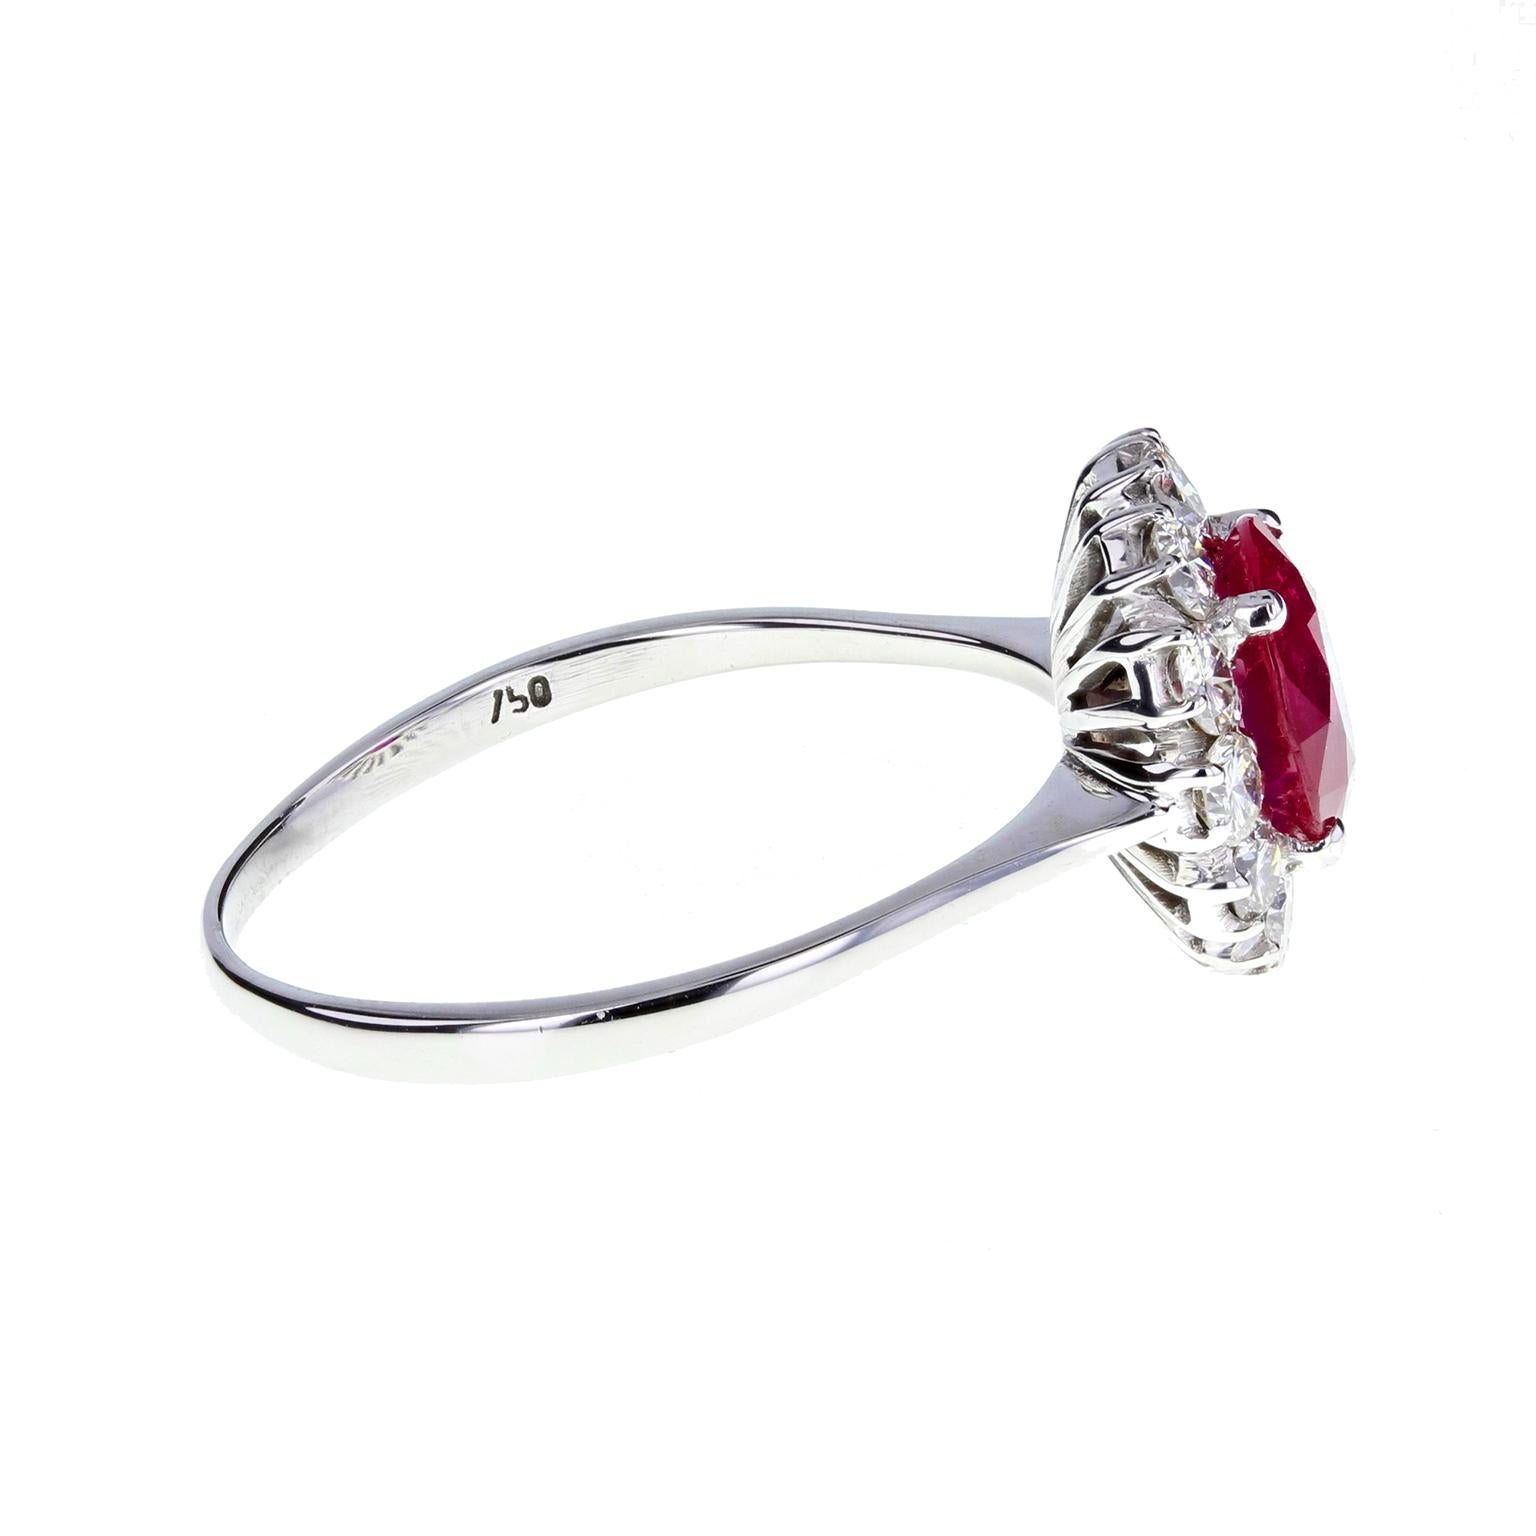 A fine and impressive vintage cluster ring. A central round-cut Burma ruby of deep 'pigeon-blood' colour is surrounded by 12 brilliant-cut diamonds of bright and lively nature, to give a round, daisy-cluster. Plain shank with knife-edge shoulders.